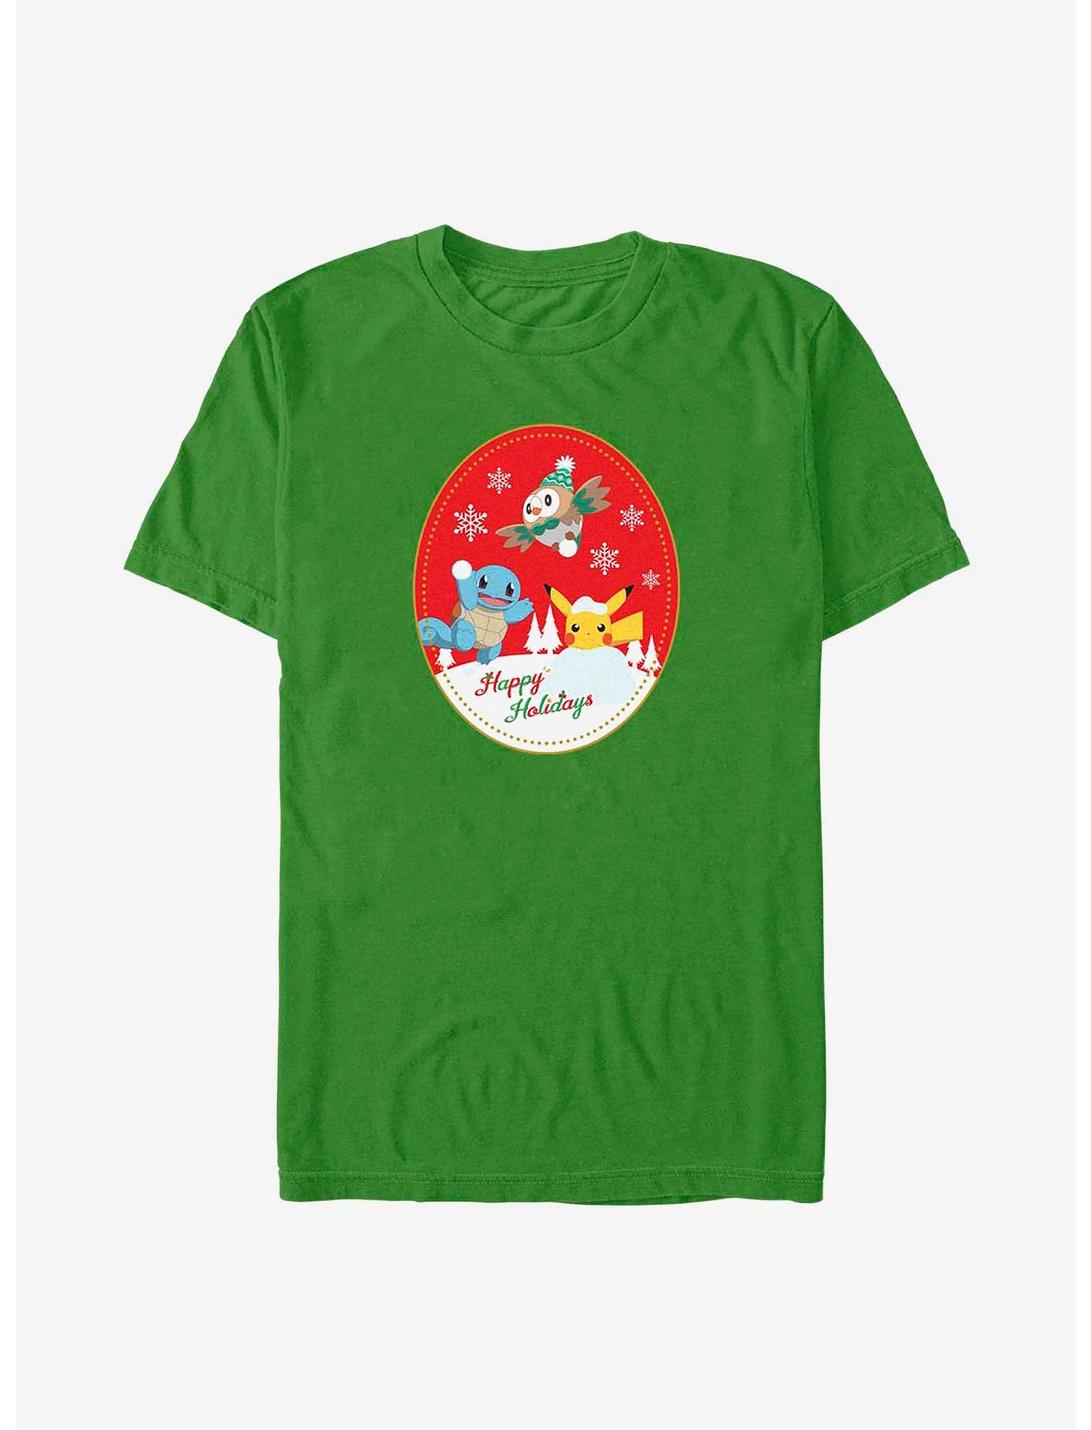 Pokémon Holiday Badge Squirtle, Rowlet And Pikachu T-Shirt, KELLY, hi-res